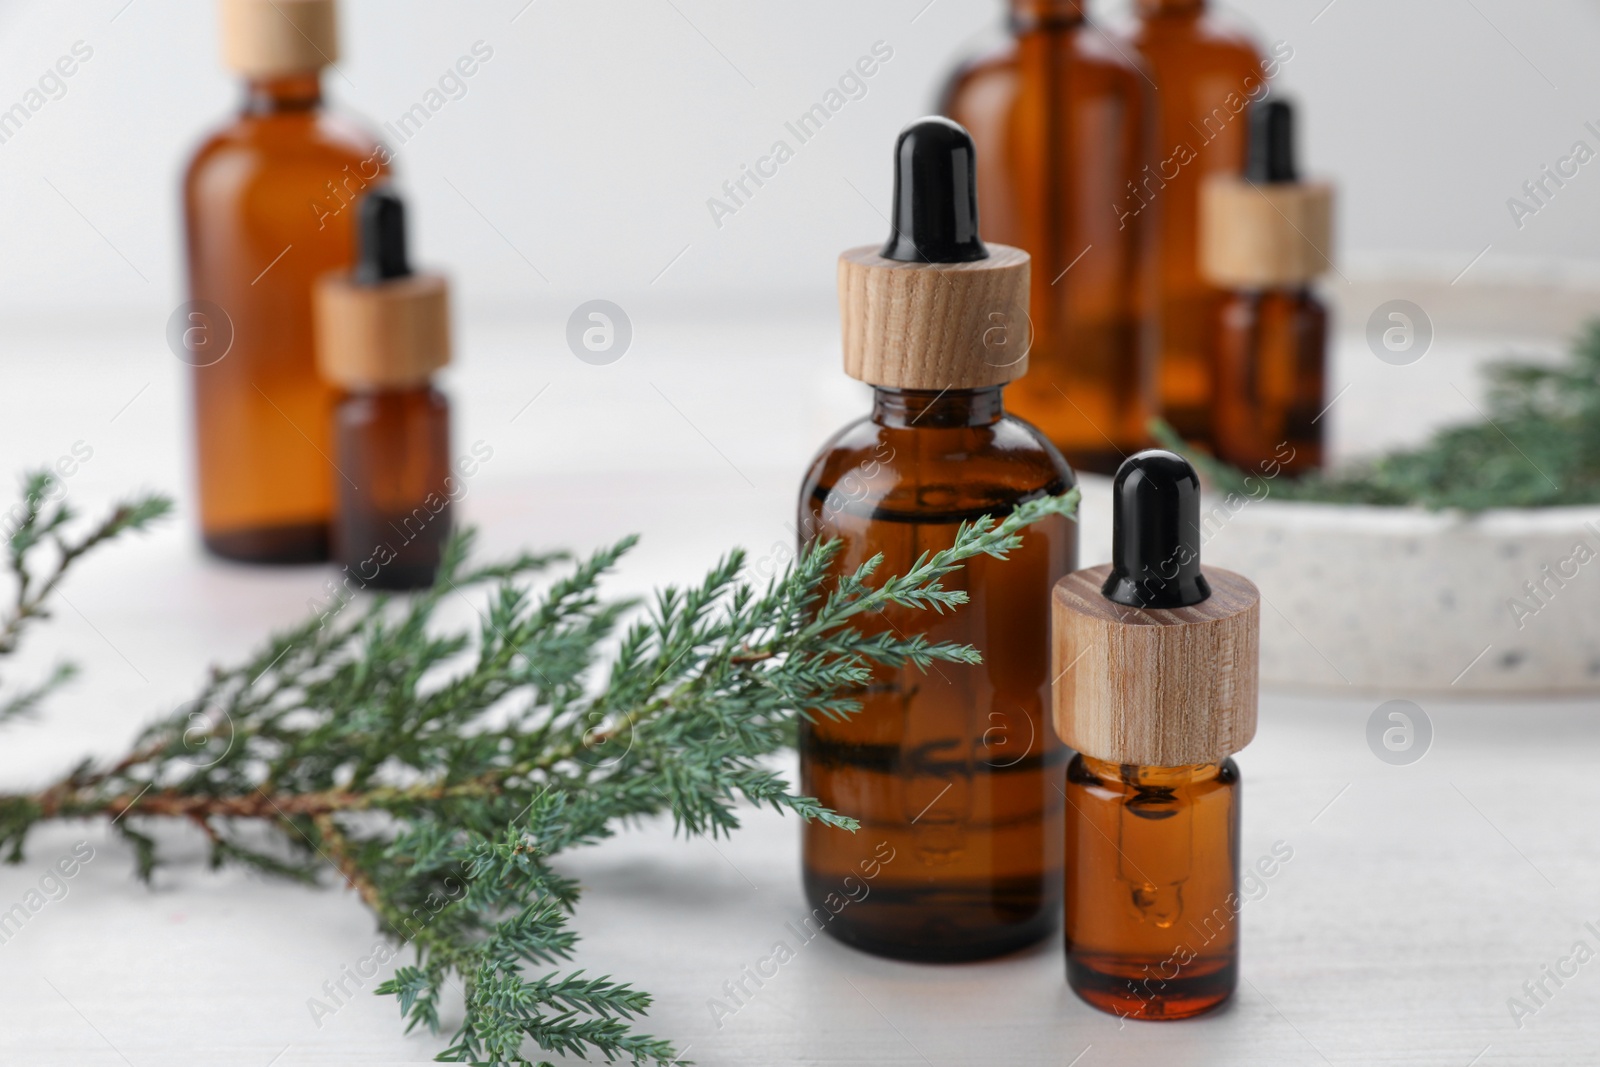 Photo of Bottles of juniper essential oil and fresh twig on white wooden table